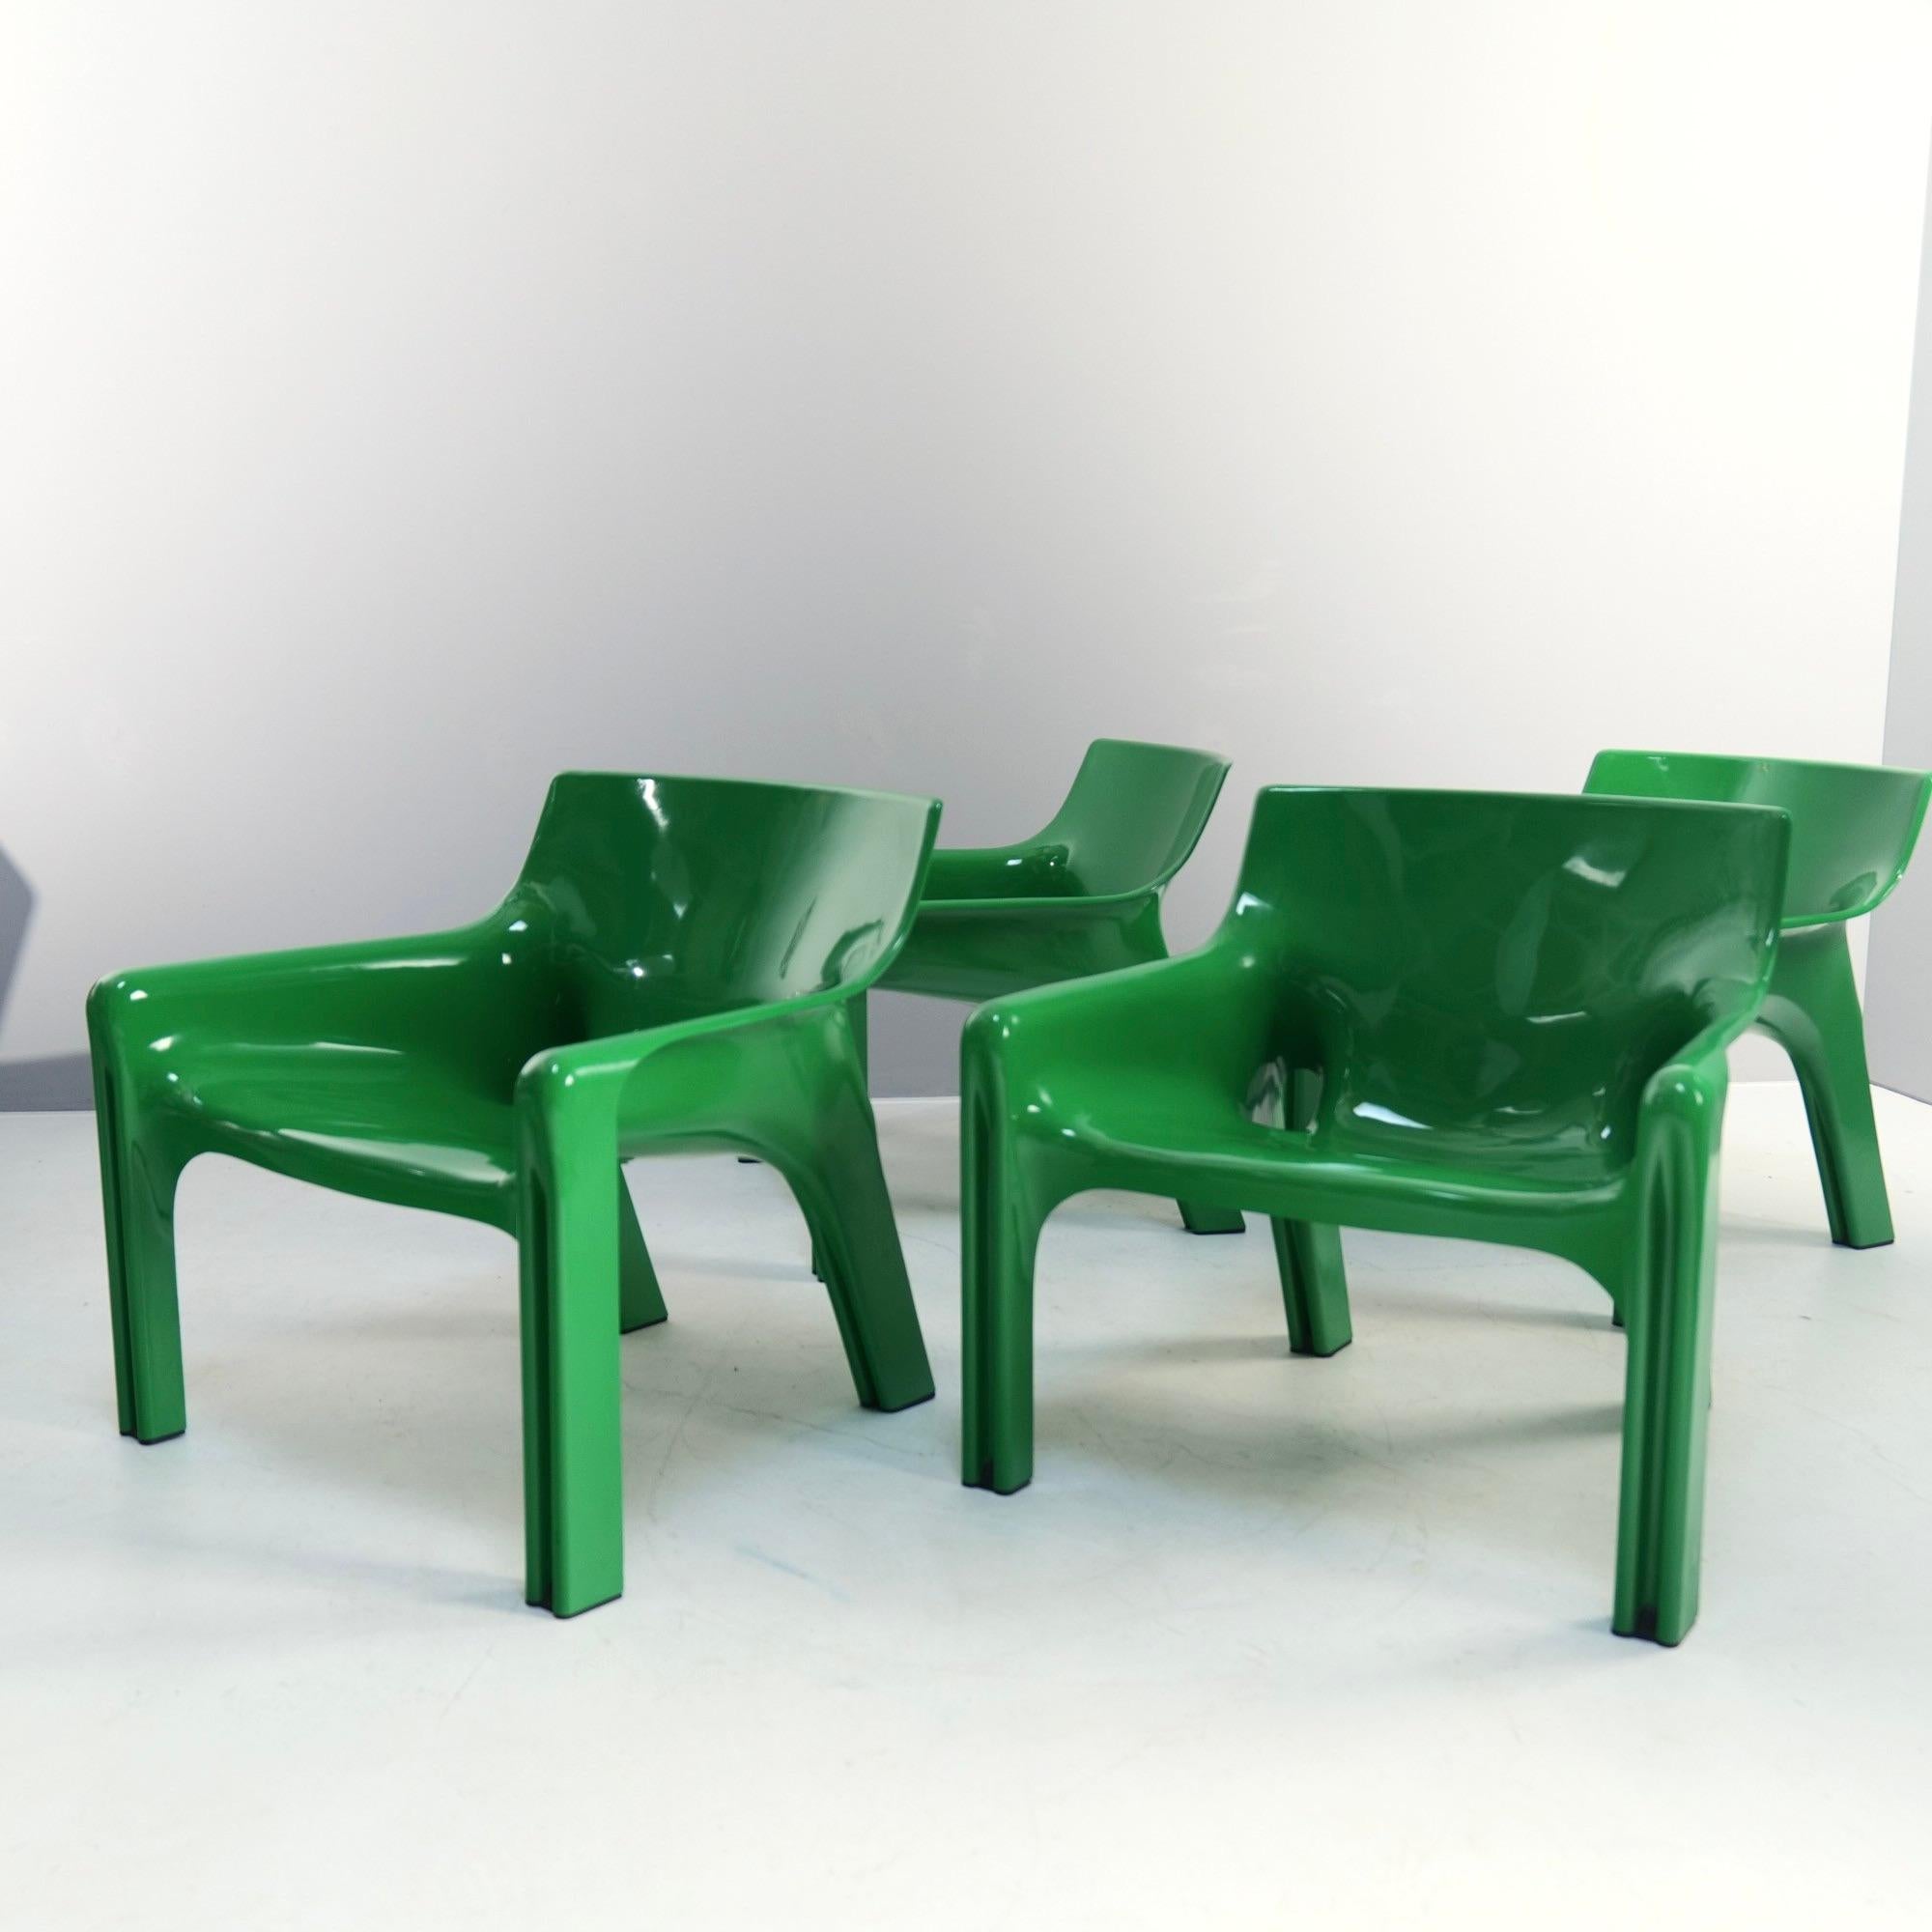 Set of 4 green armchairs designed by Vico Magistretti for Artemide.

Made in 1970's in Italy by Artemide

dimensions:
68 cm height
67 depth
78 cm width
37 cm seating height

material:
abs-plastic

condition:
Fully polished . Very good condition with